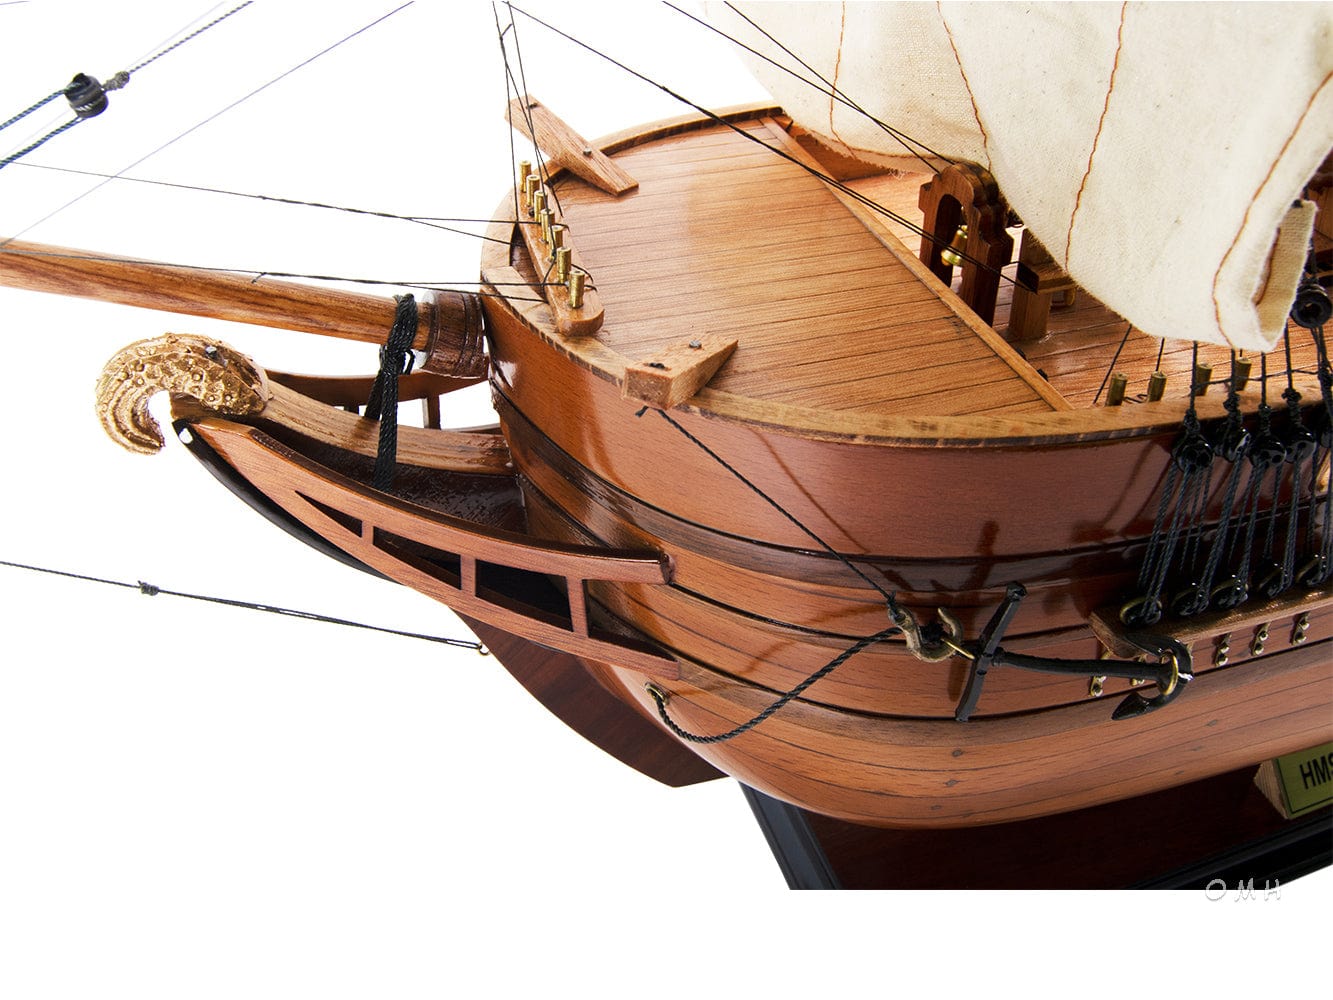 ALDO Creative Arts Collectibles Scale Model L: 32 W: 9 H: 29 Inches / NEW / wood RRS Discovery British National Antarctic Expedition Barque-Rigged Auxiliary Steamship  Exclusive Edition Sailboat Wood Model Assembled